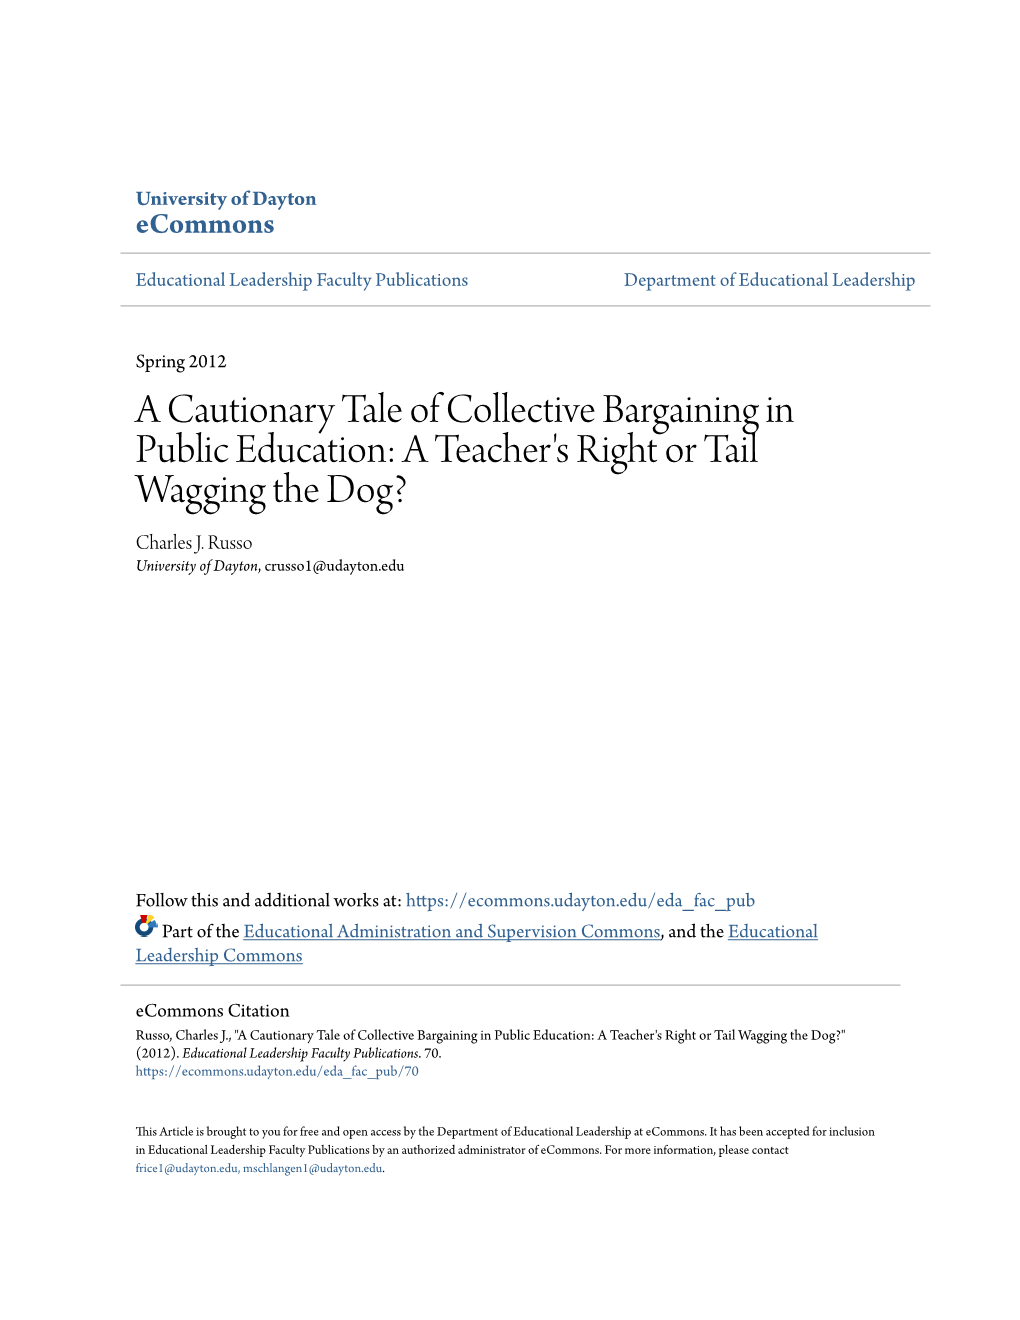 A Cautionary Tale of Collective Bargaining in Public Education: a Teacher's Right Or Tail Wagging the Dog? Charles J